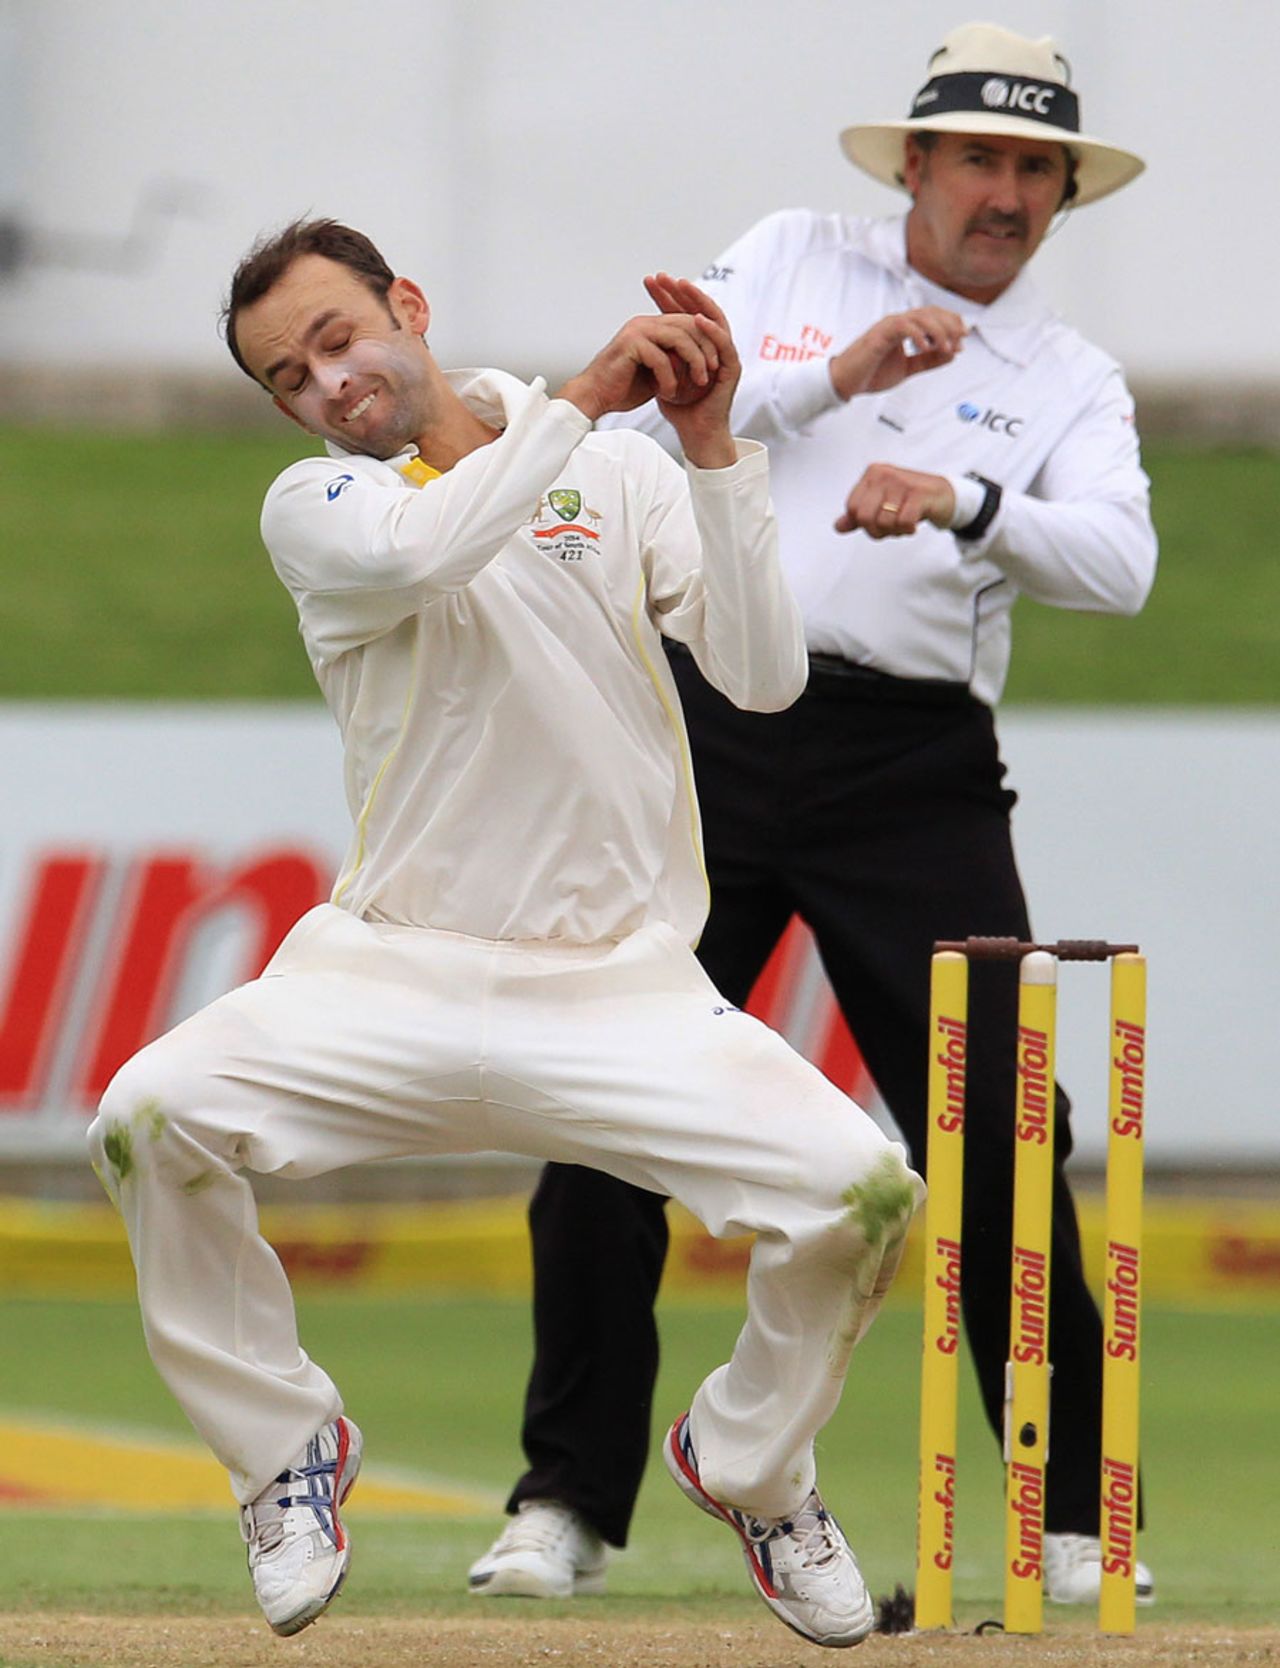 Nathan Lyon fields off his own bowling, South Africa v Australia, 2nd Test, Port Elizabeth, 1st day, February 20, 2014